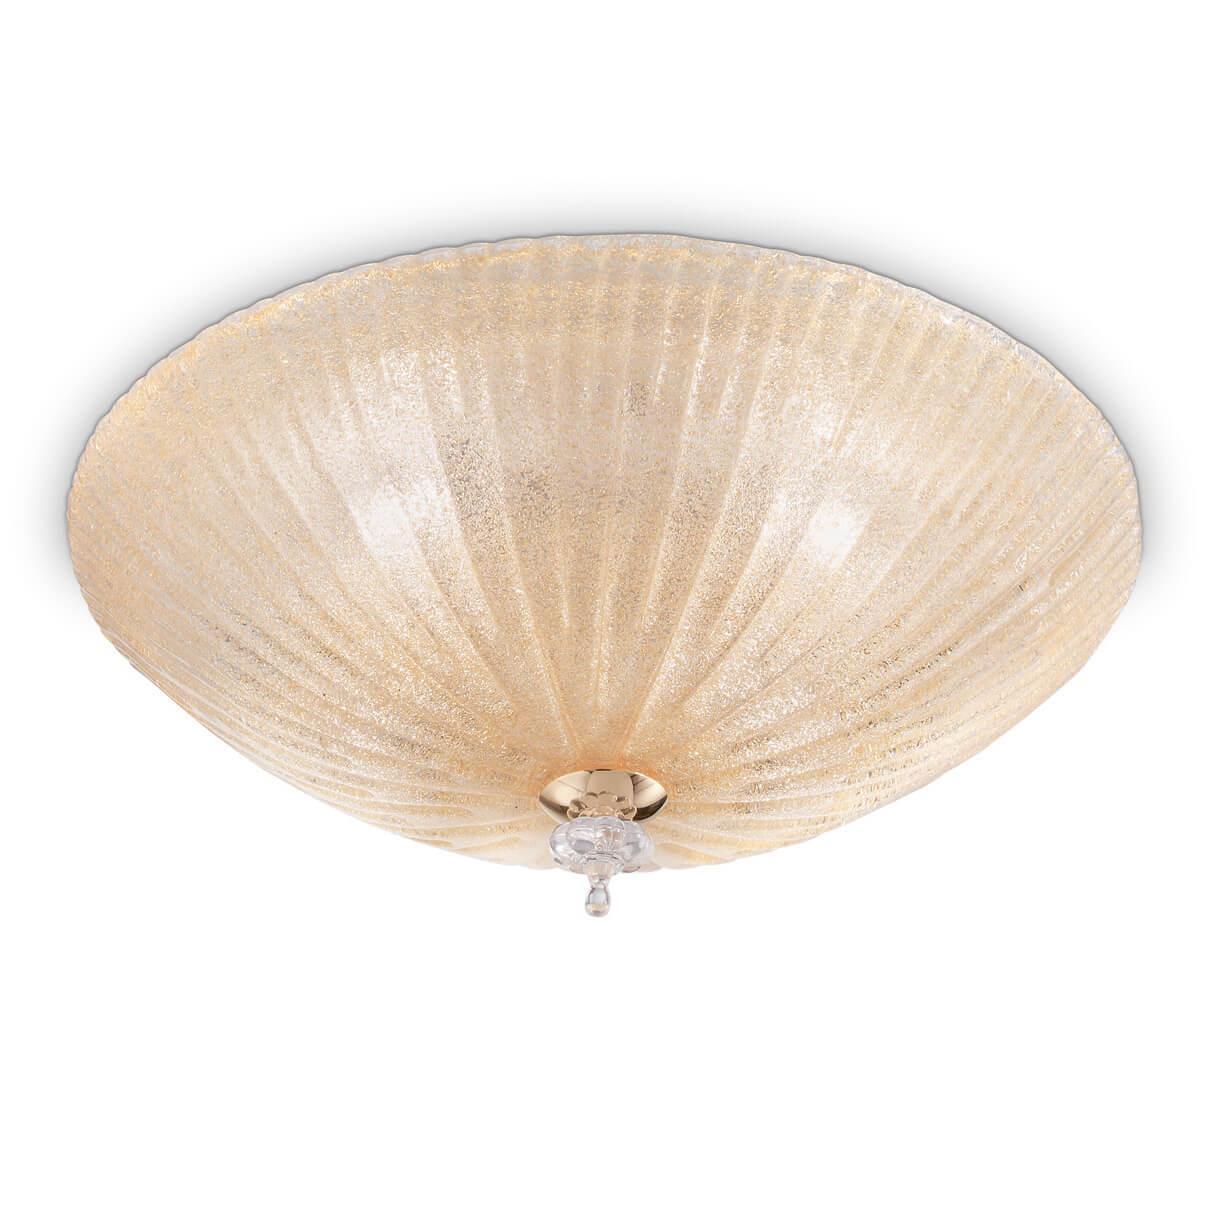   Ideal Lux Shell PL3 Ambra 140179